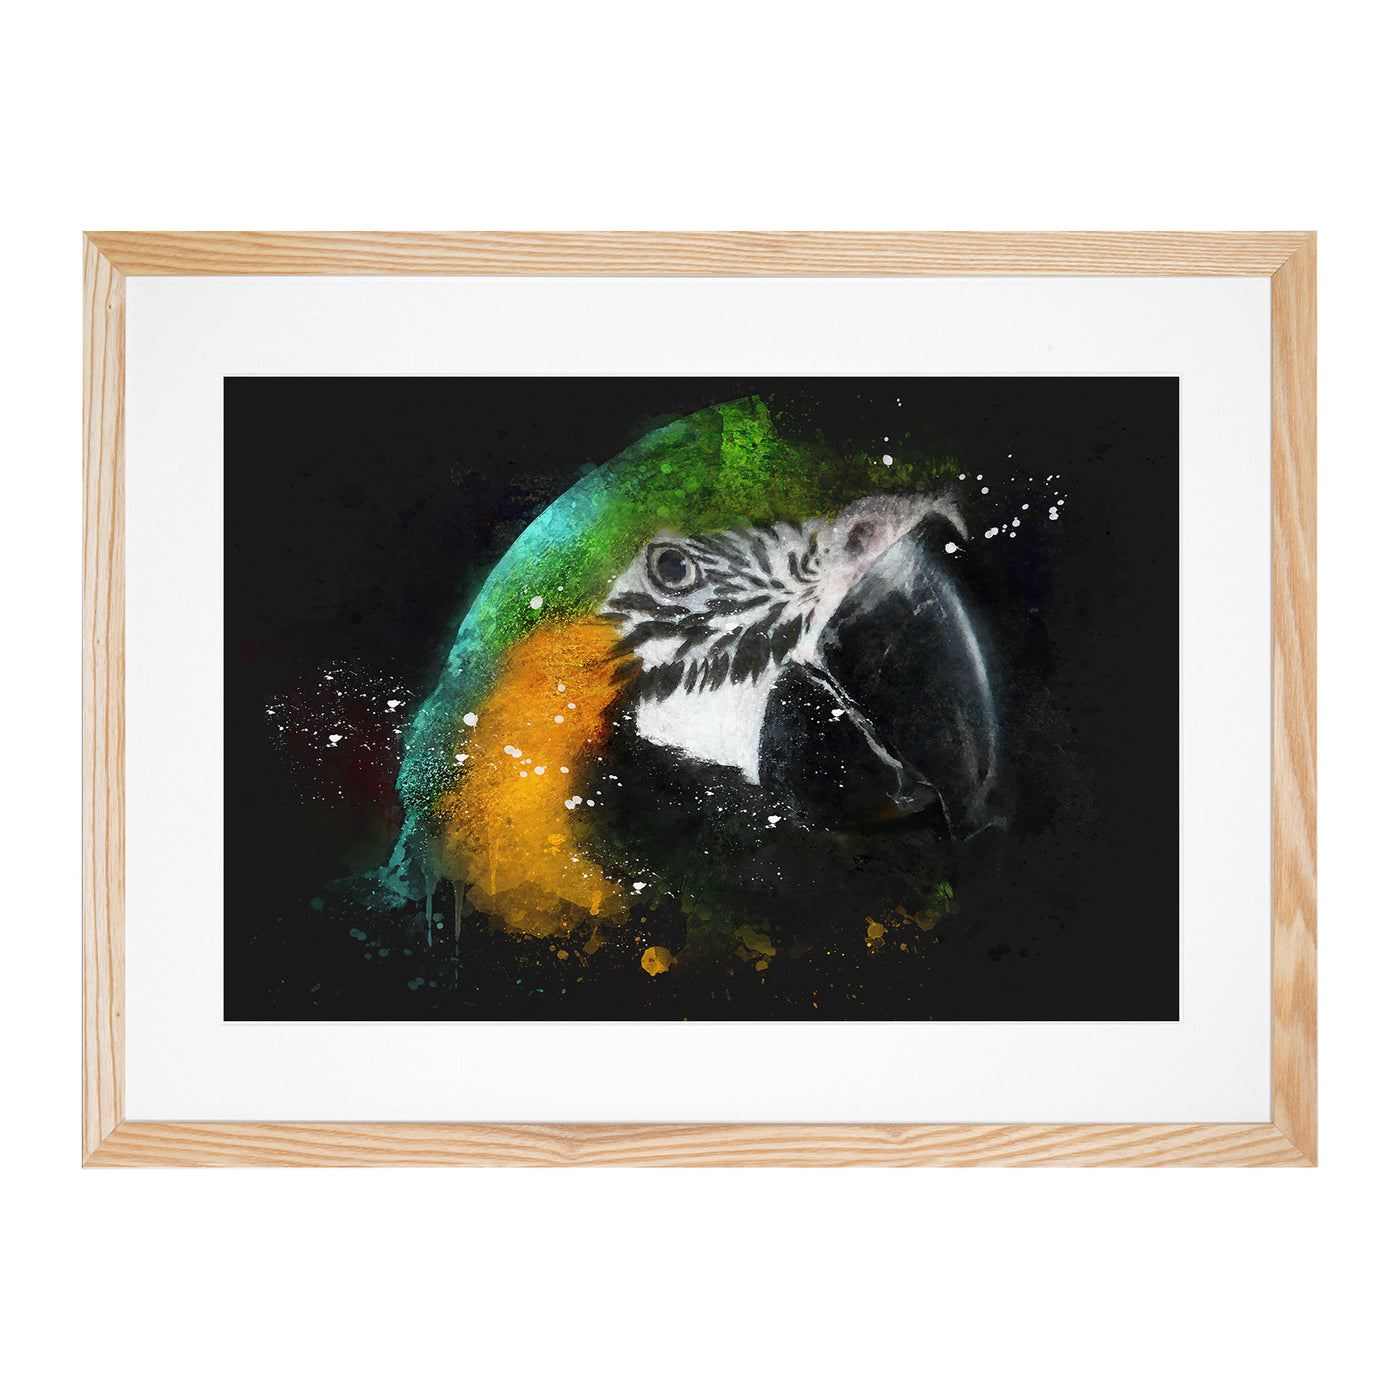 Yellow & Green Macaw Parrot